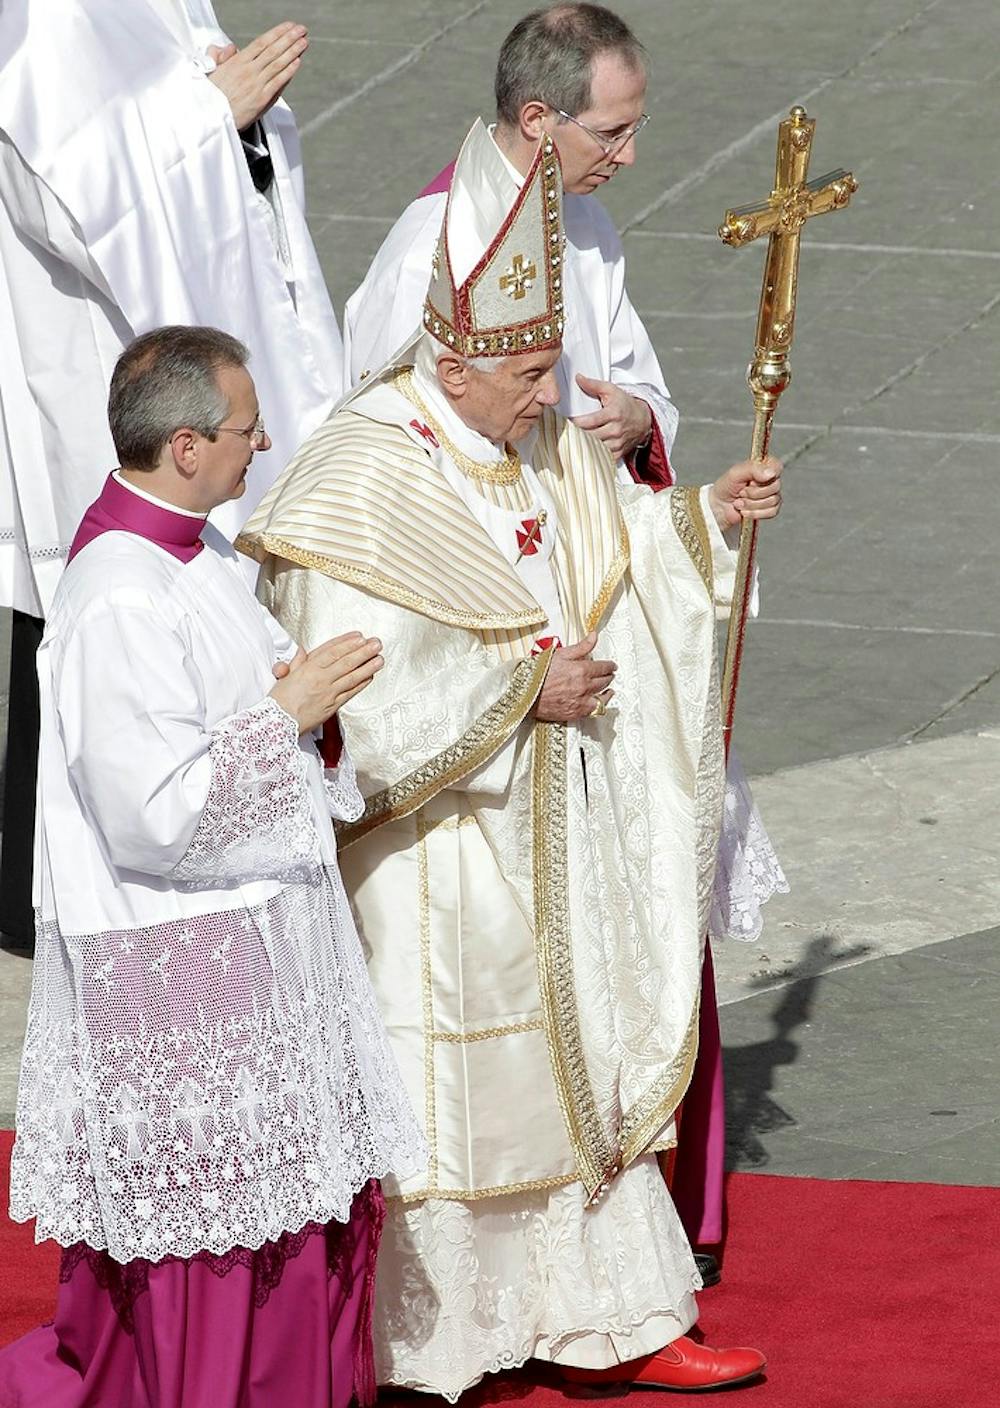 	<p>Pope Benedict <span class="caps">XVI</span> leaves the canonization ceremony of seven new saints, including Kateri Tekakwitha, on Oct. 21. The Pope soon will be using a popular social media website, Twitter.</p>